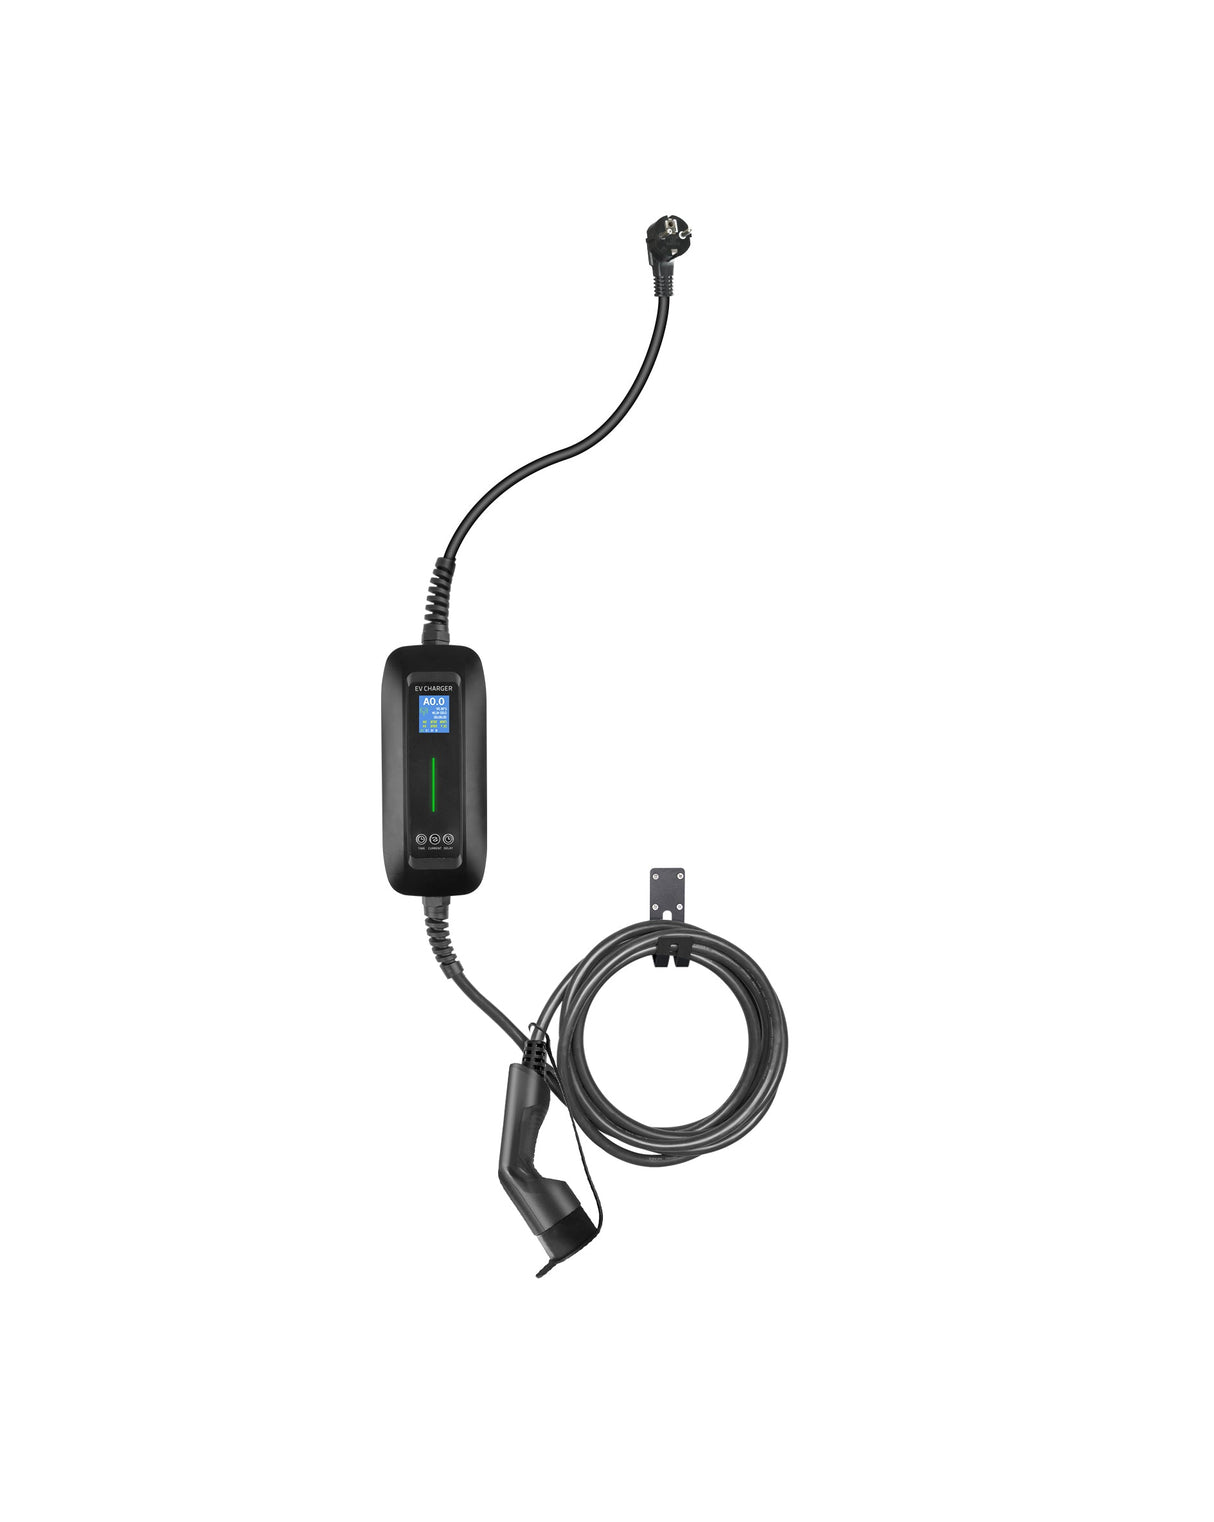 Mobile Charger Renault Captur - LCD Black Type 2 to Schuko - Delayed charging and Memory function